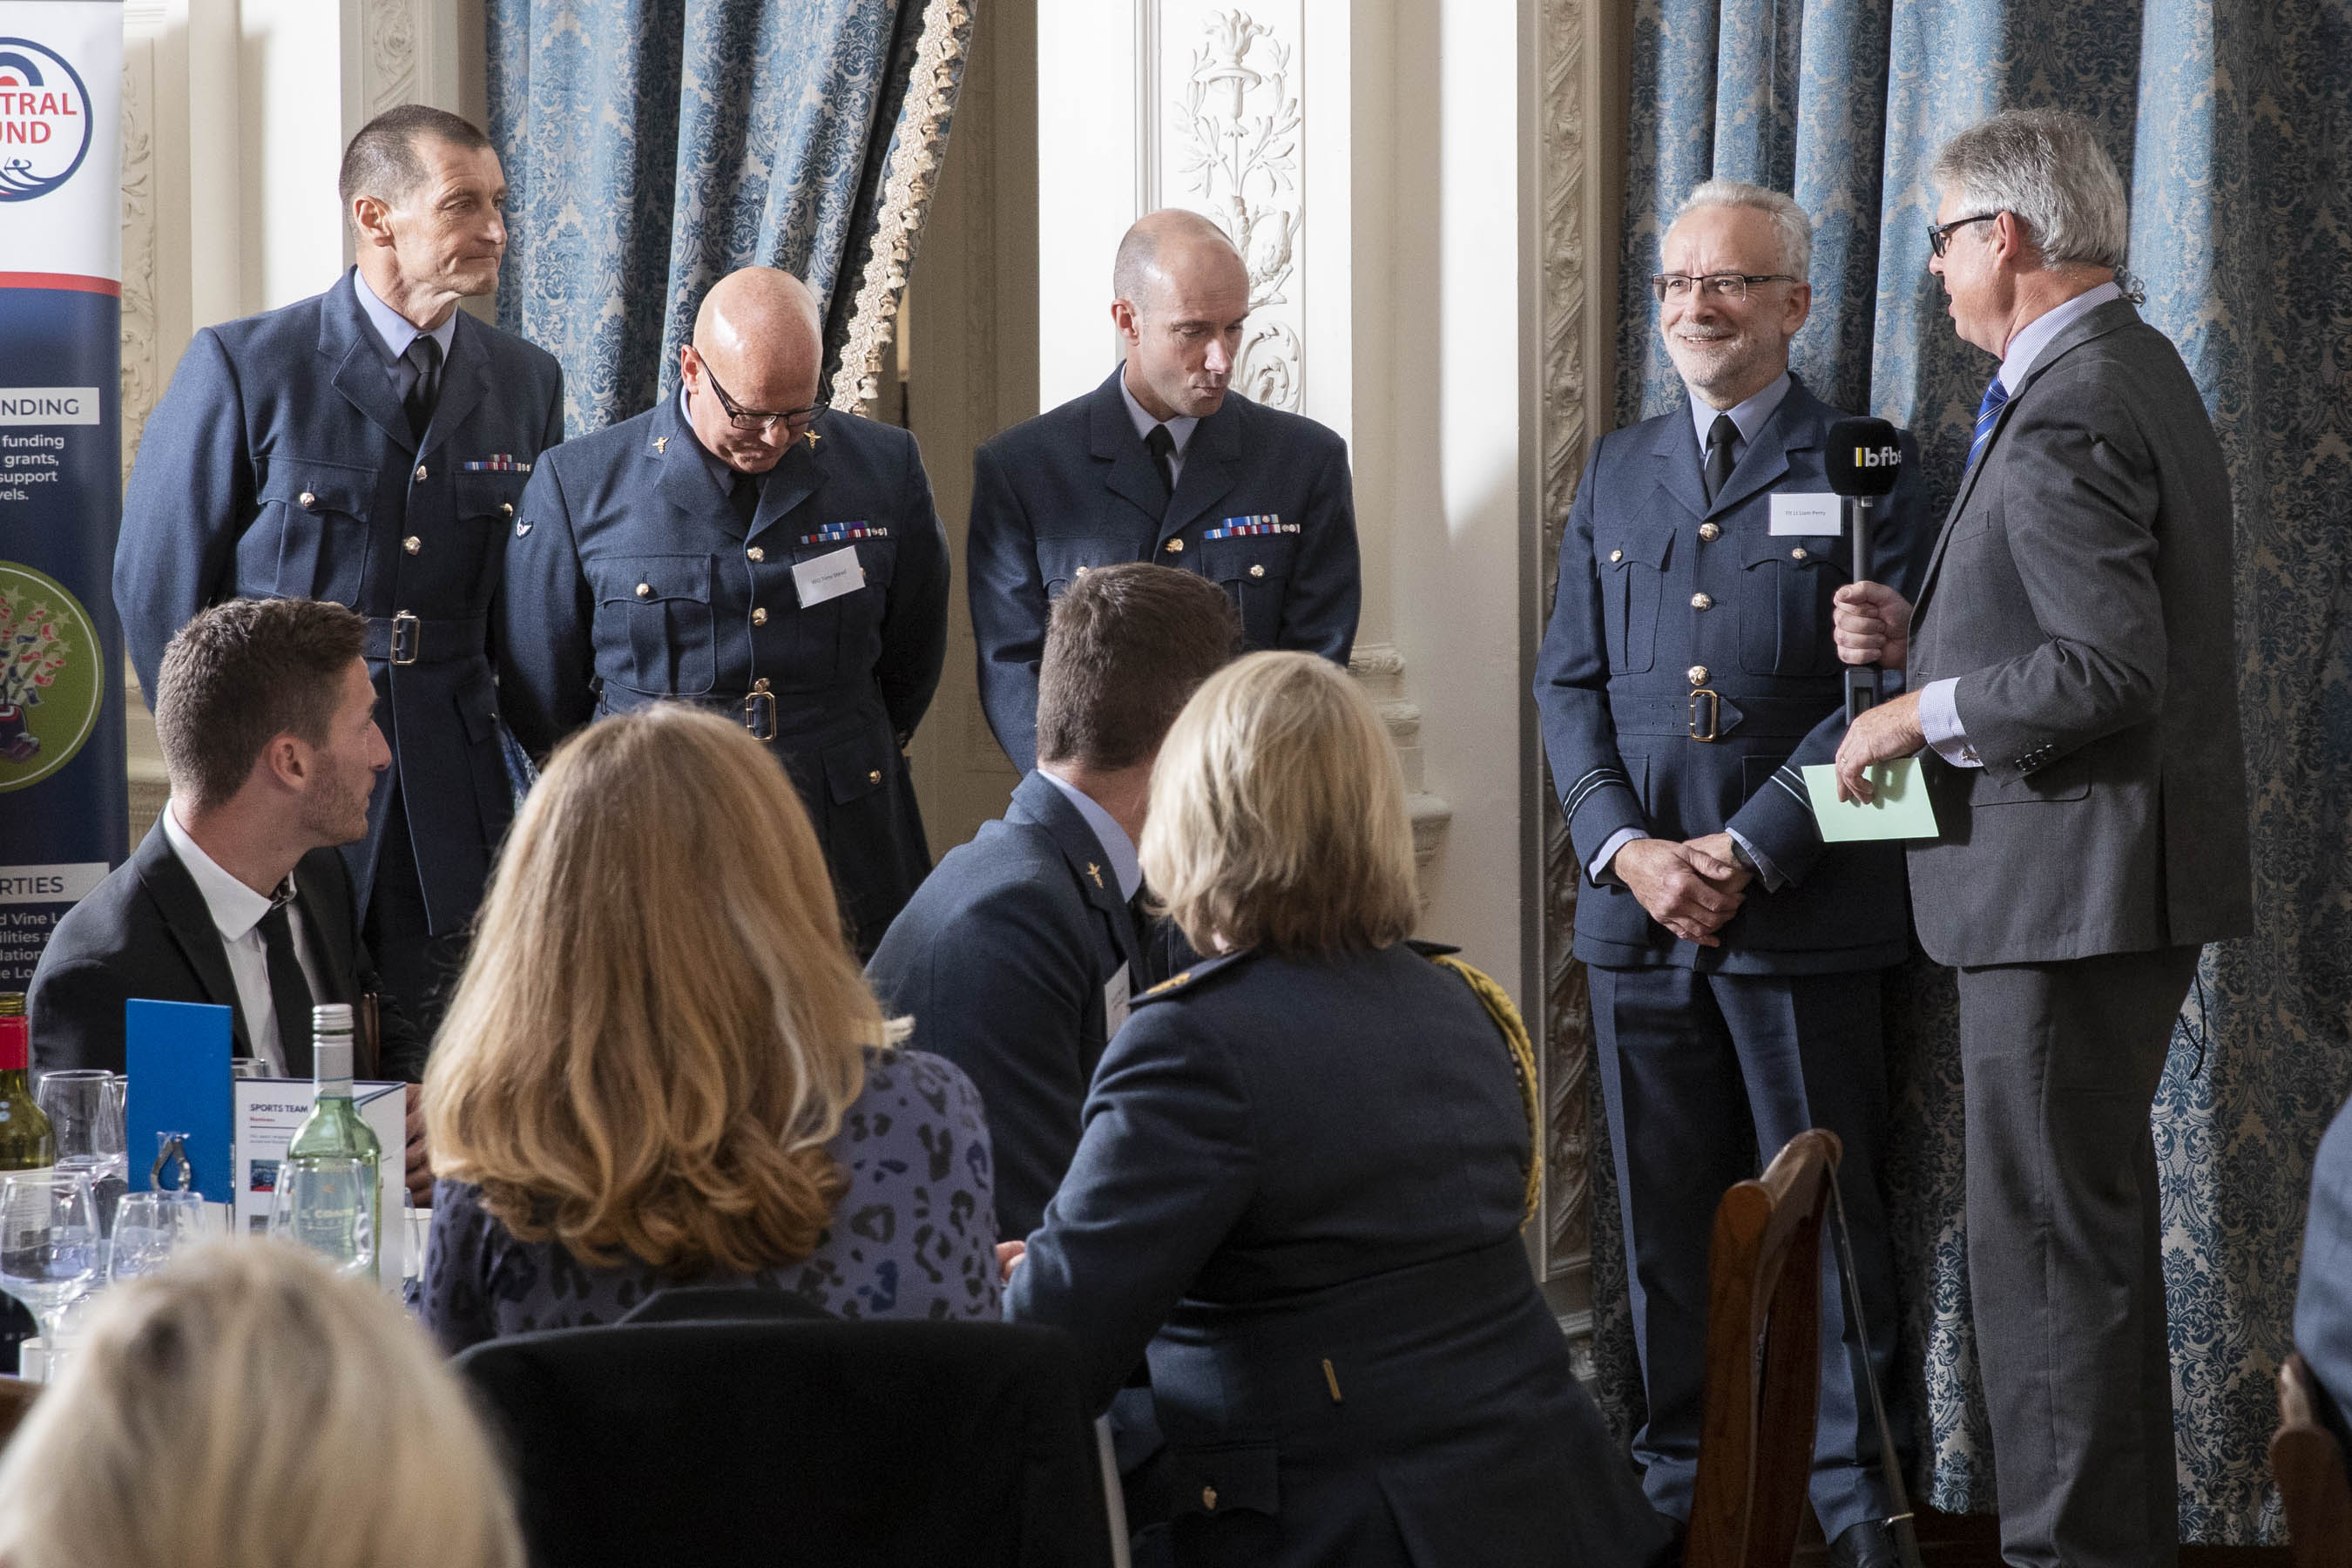 Image shows RAF personnel receiving award.